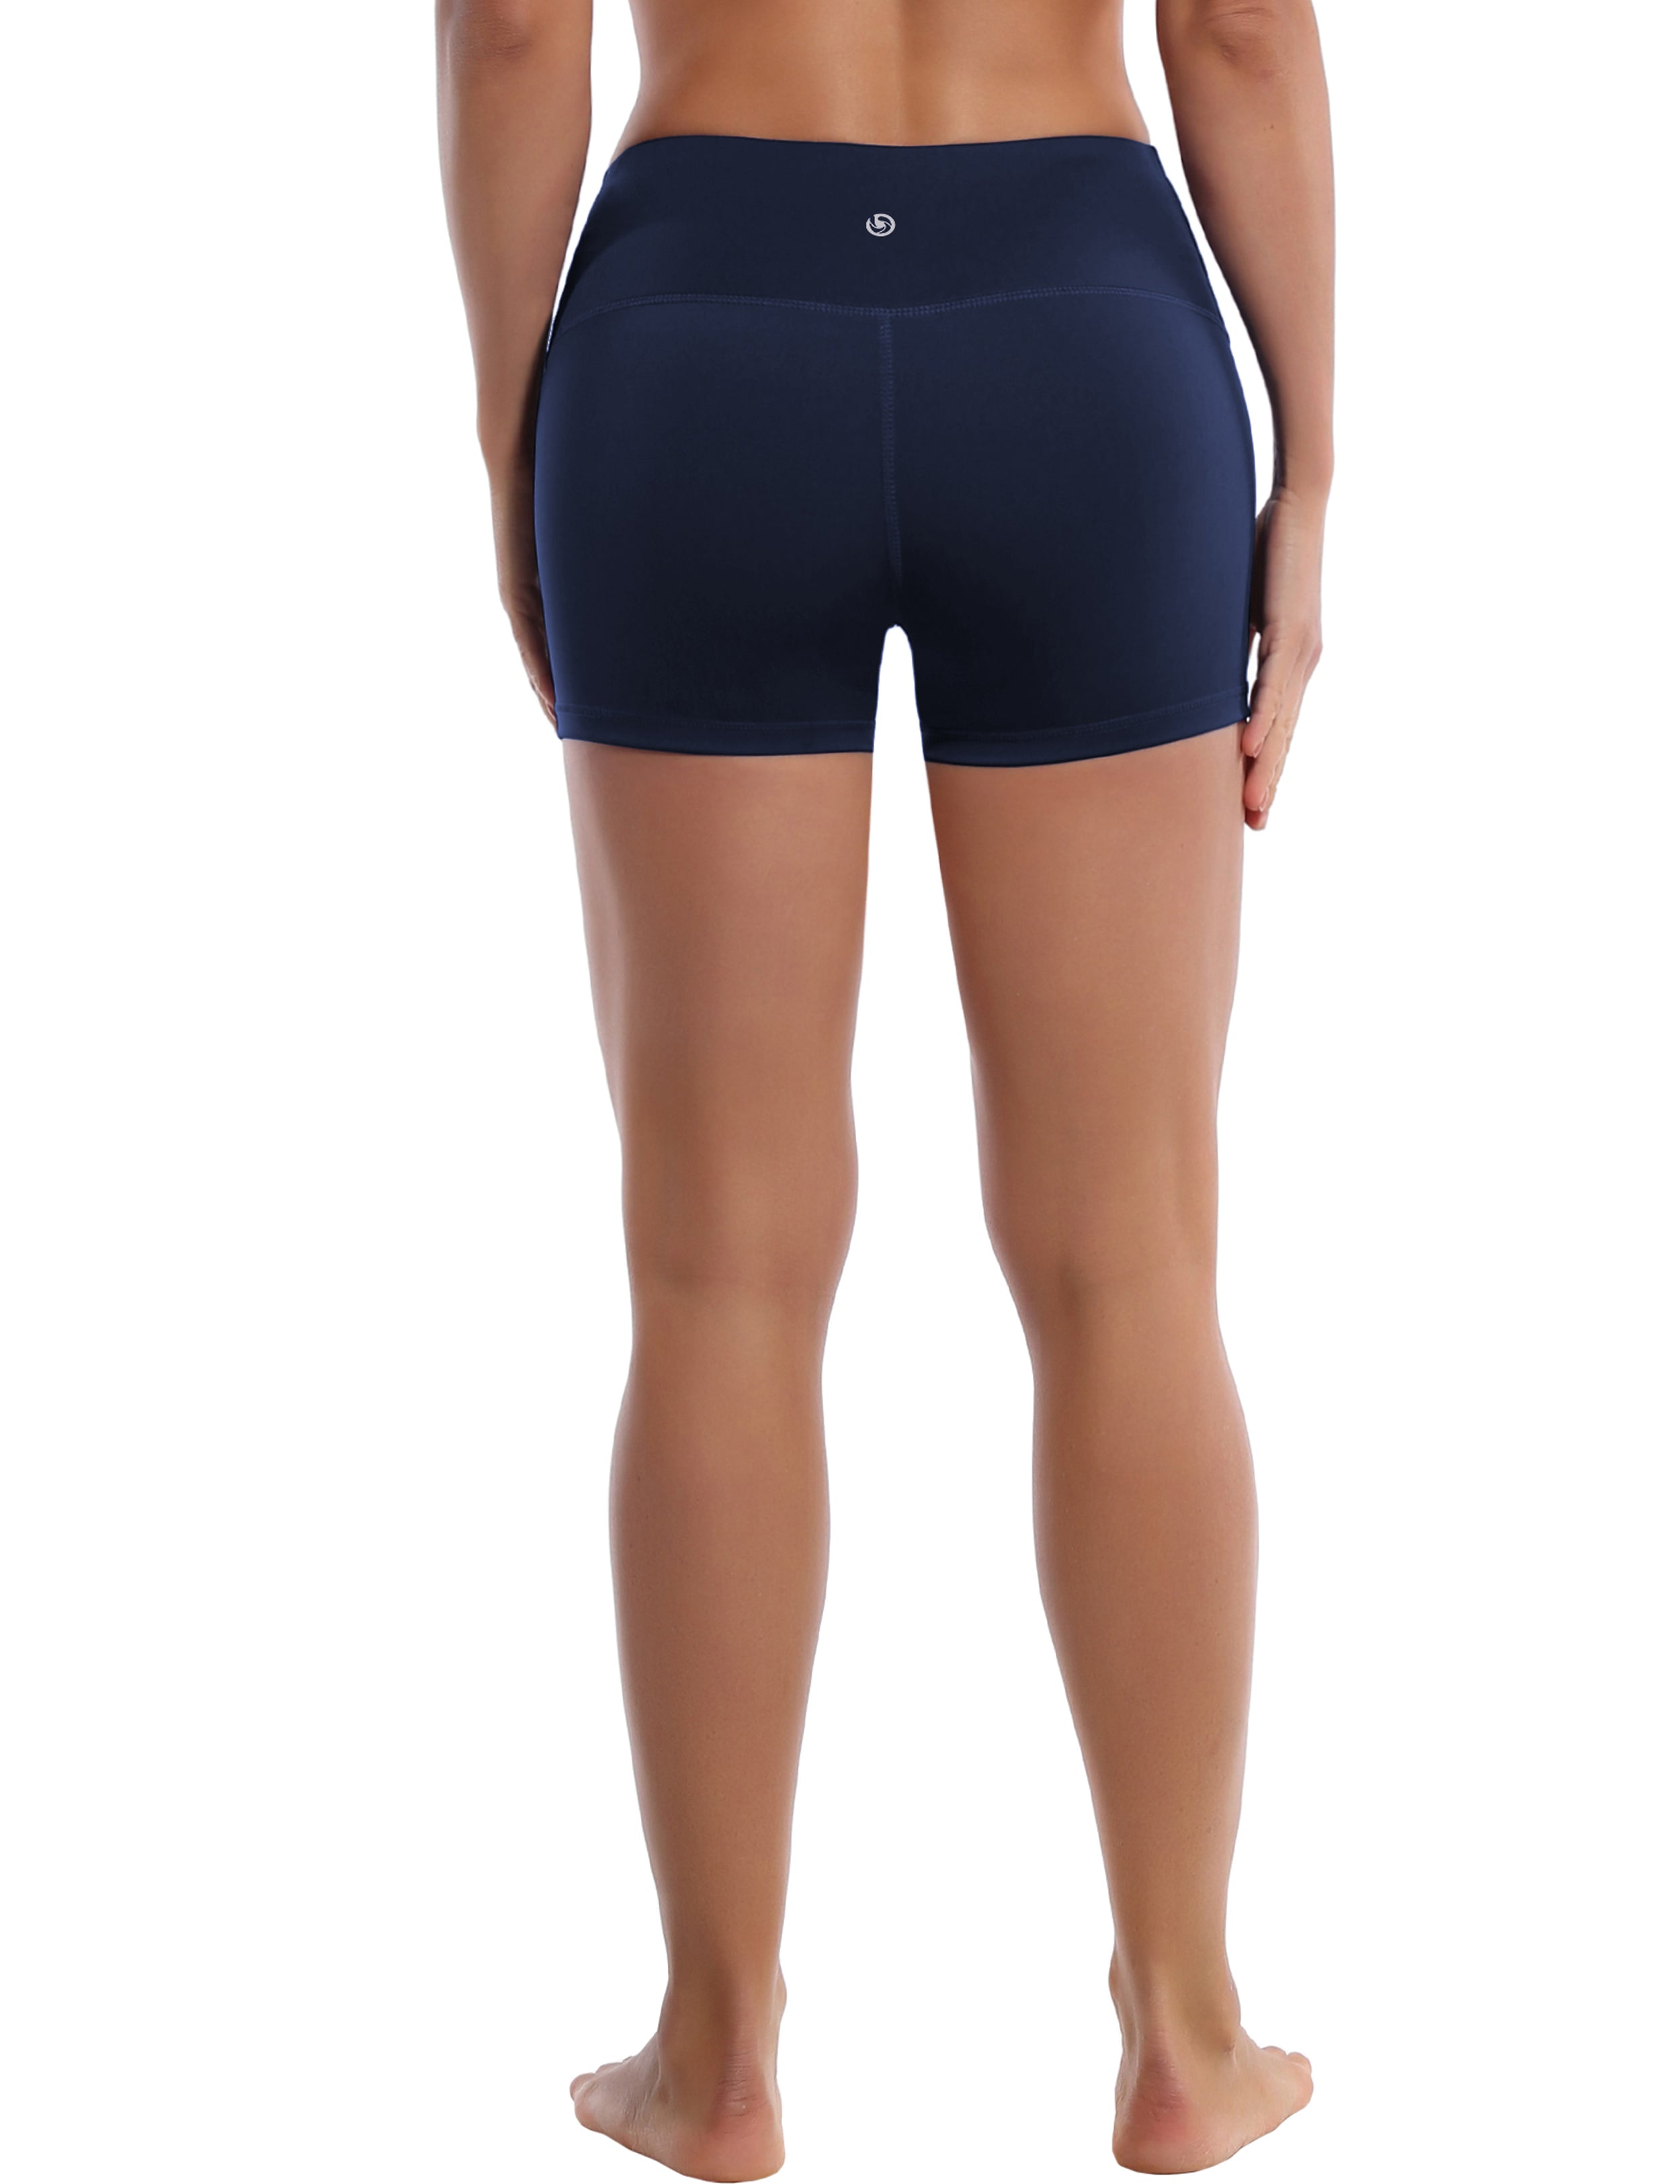 2.5" Biking Shorts darknavy Softest-ever fabric High elasticity High density 4-way stretch Fabric doesn't attract lint easily No see-through Moisture-wicking Machine wash 75% Nylon, 25% Spandex